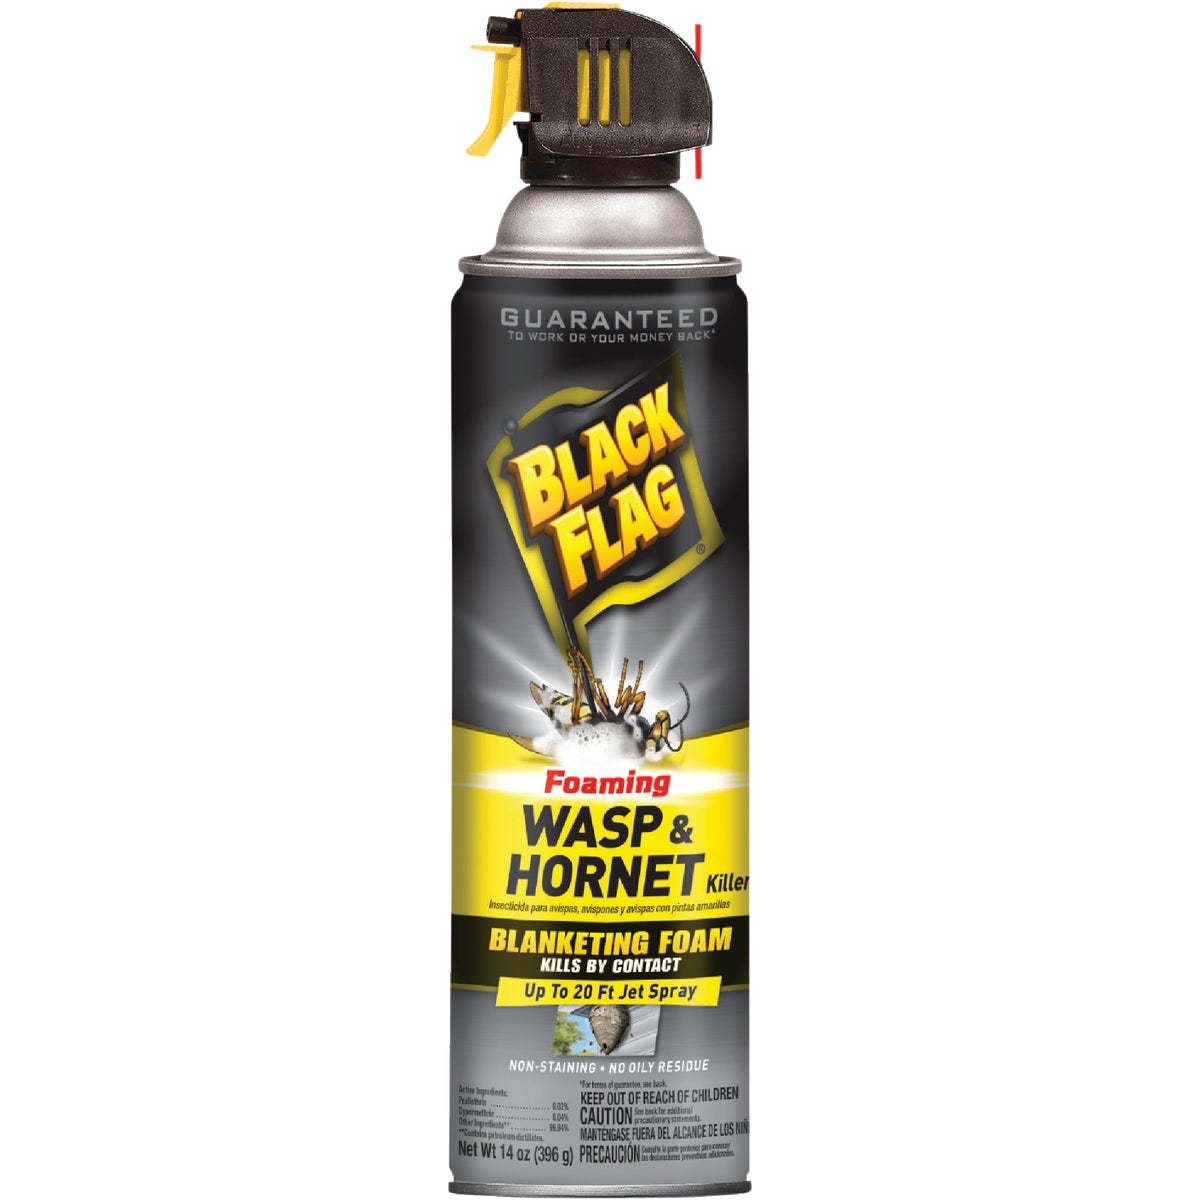 Item 700406, Black Flag blanketing foam spray covers the entire hive or nest.